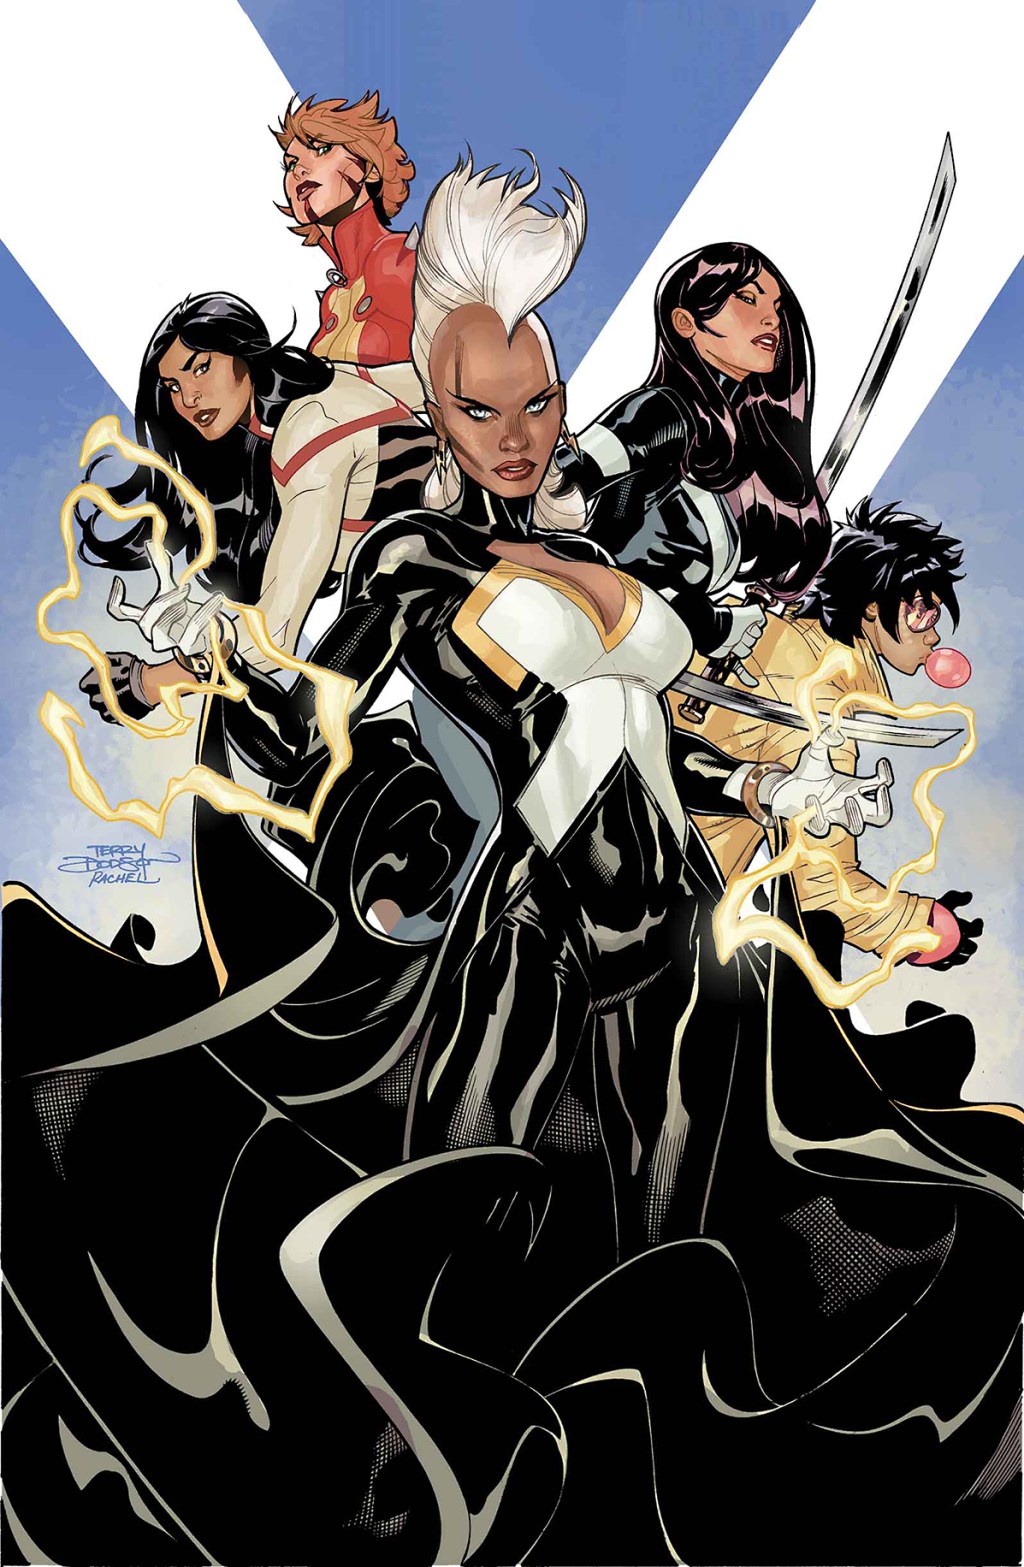 M, Marvel Girl, Storm, Psylocke, and Jubilee stand ready to confront The Future on Rachel and Terry Dodson's cover to X-Men Vol. 4 #16 "Bloodline: 4 of 5" (2014), Marvel Comics